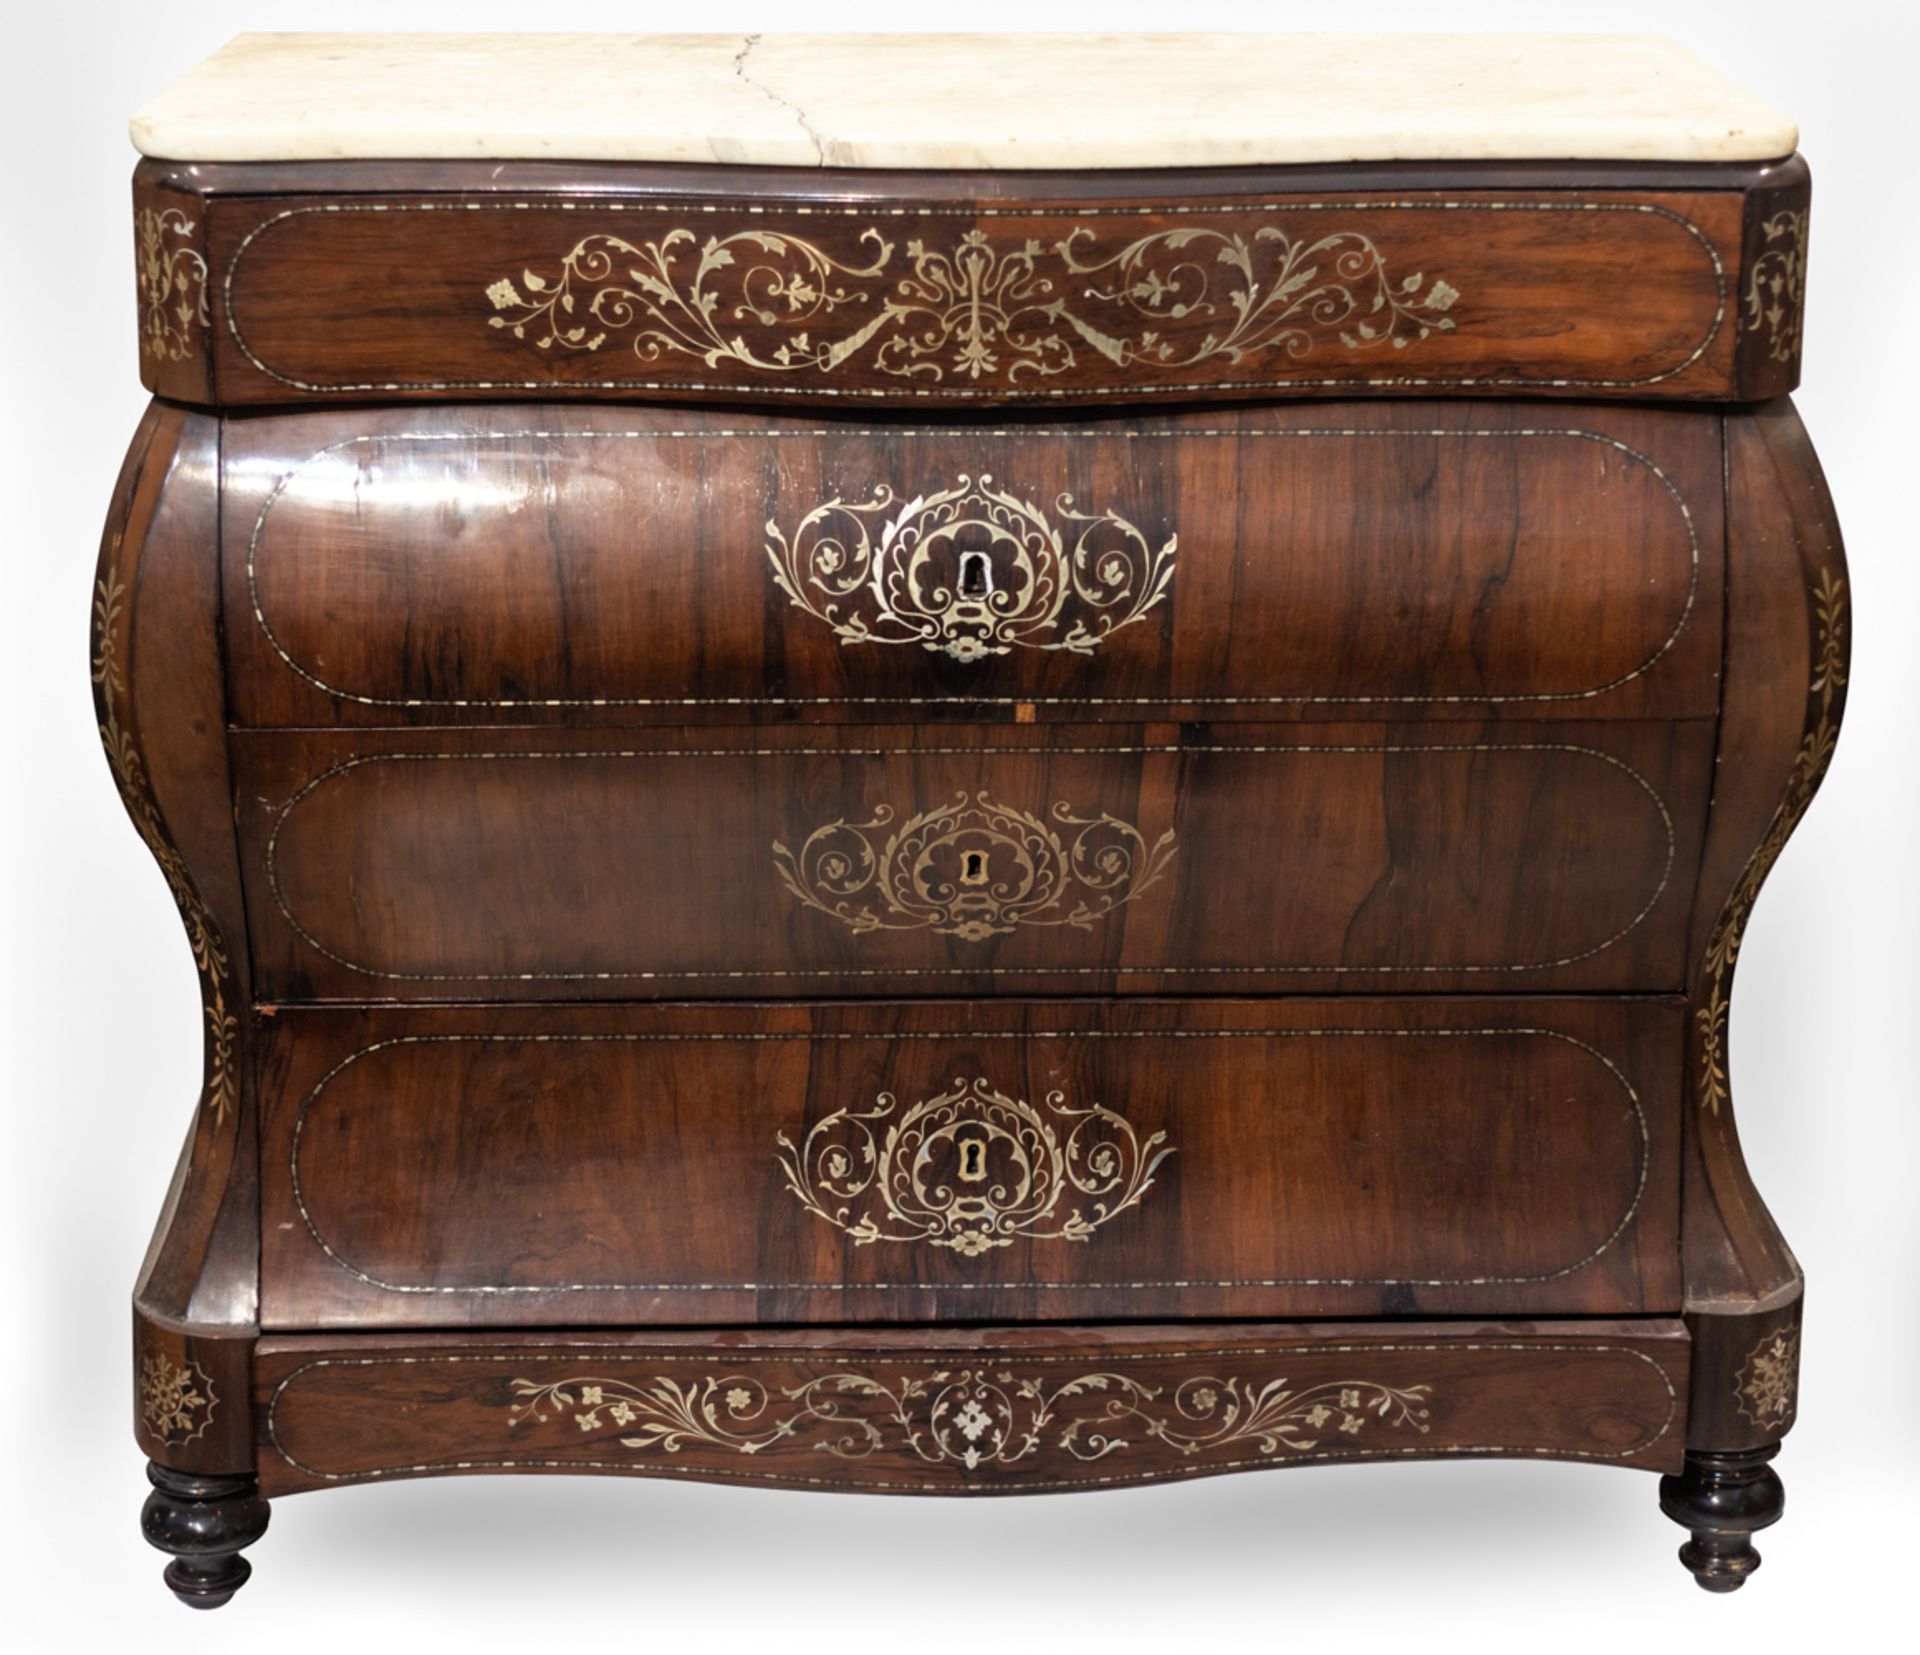 Elizabethan chest of drawers in jacaranda wood with zinc marquetry, five drawers and a marble top, m